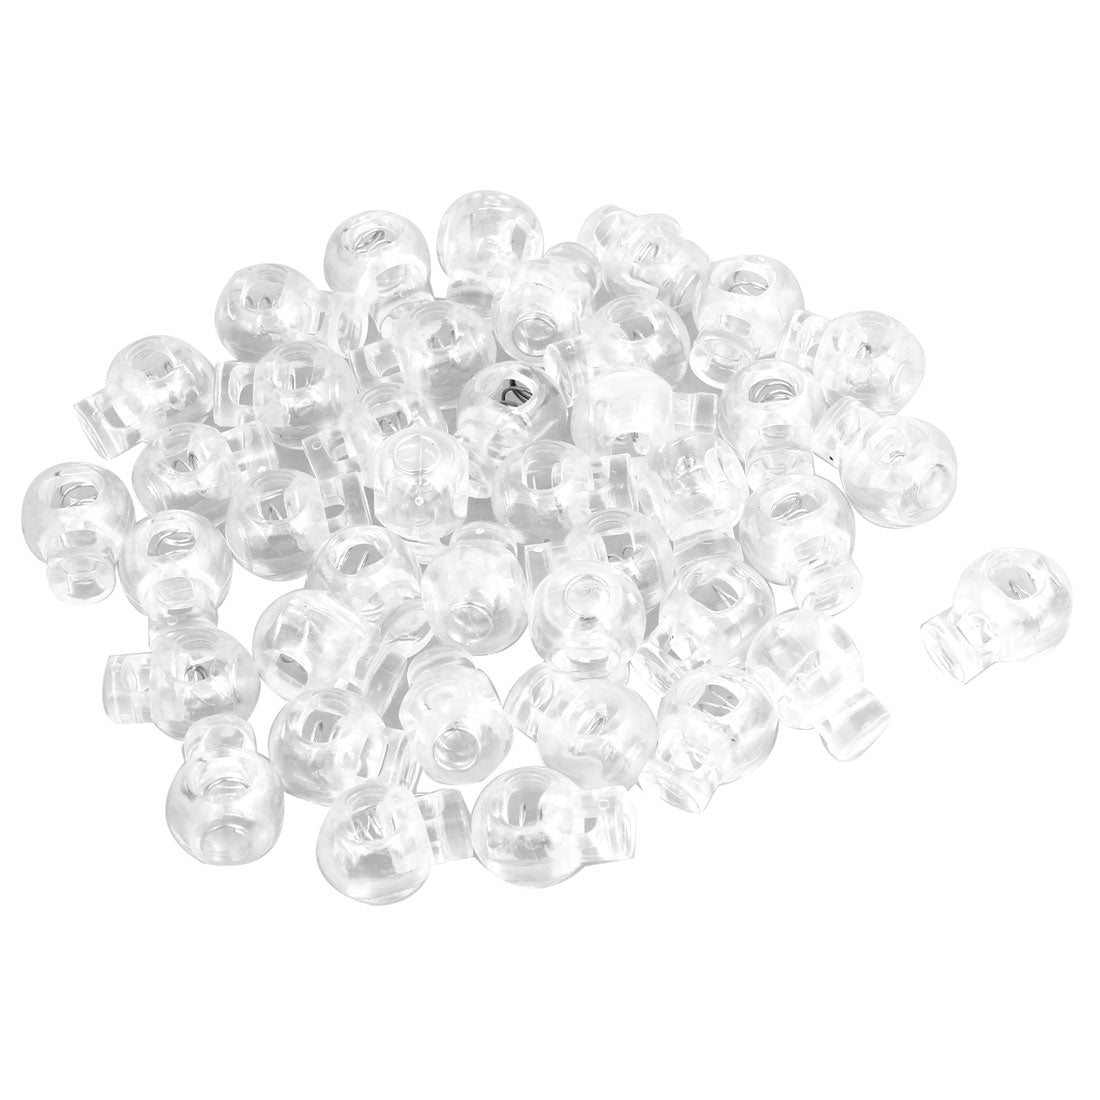 uxcell Uxcell 40 Pcs 6mm Dia Single Hole Spring Drawstring Cord Locks Ends Clear White